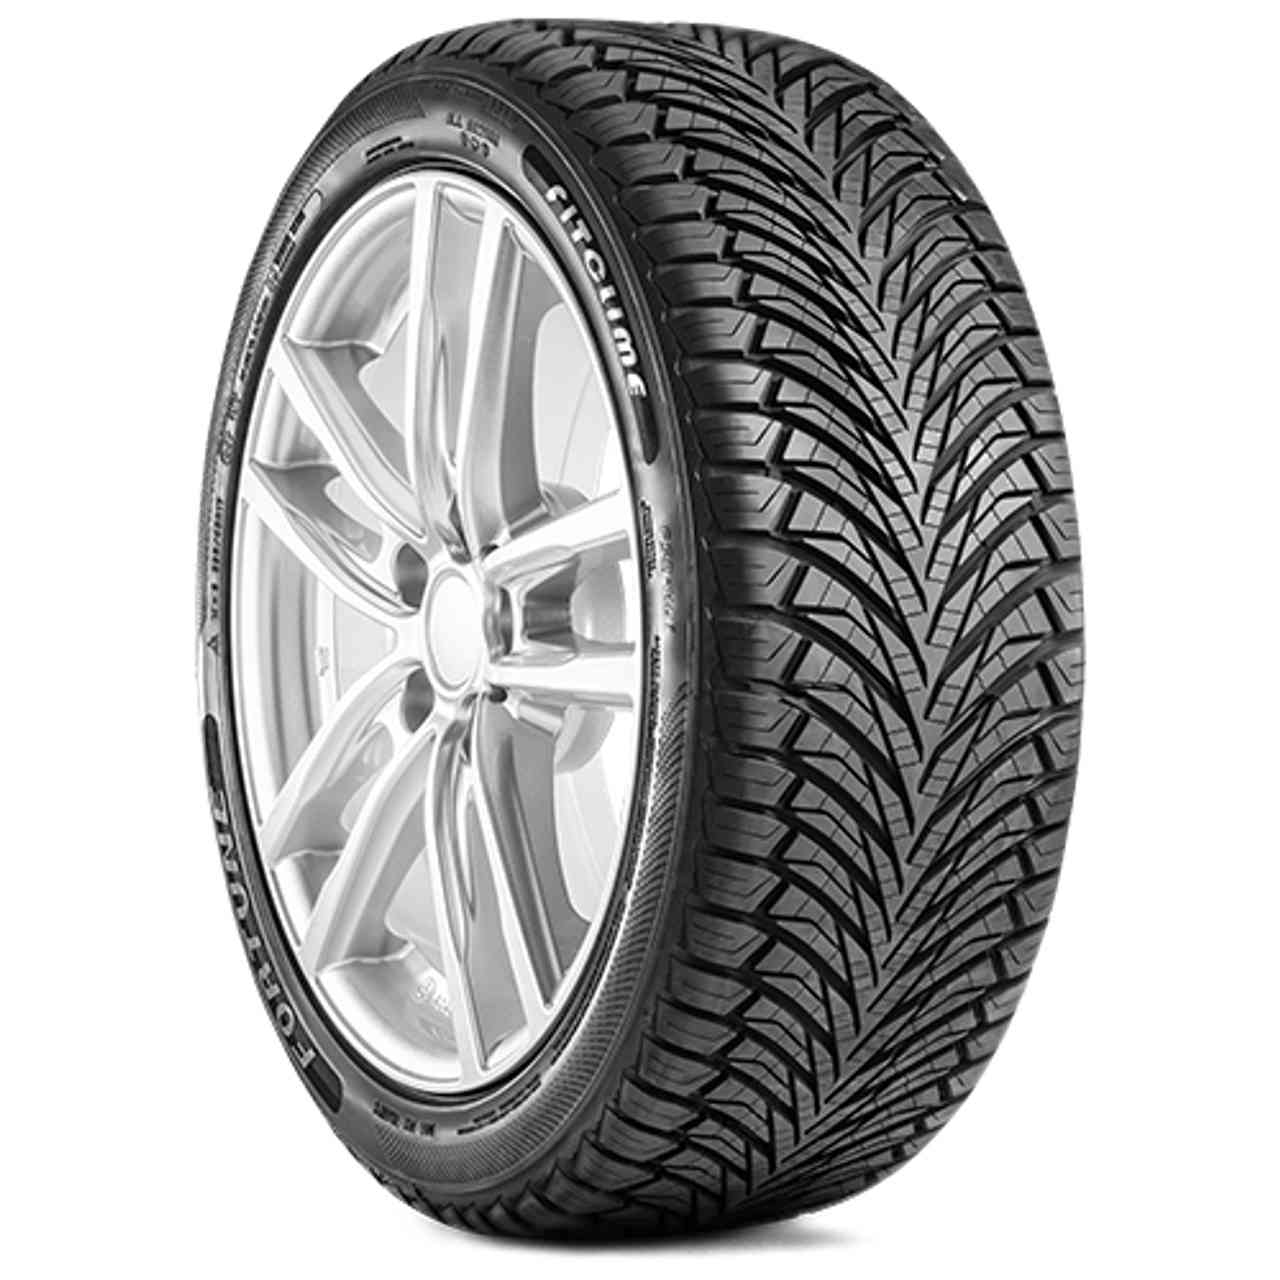 FORTUNE FITCLIME FSR-401 185/55R15 86V BSW XL